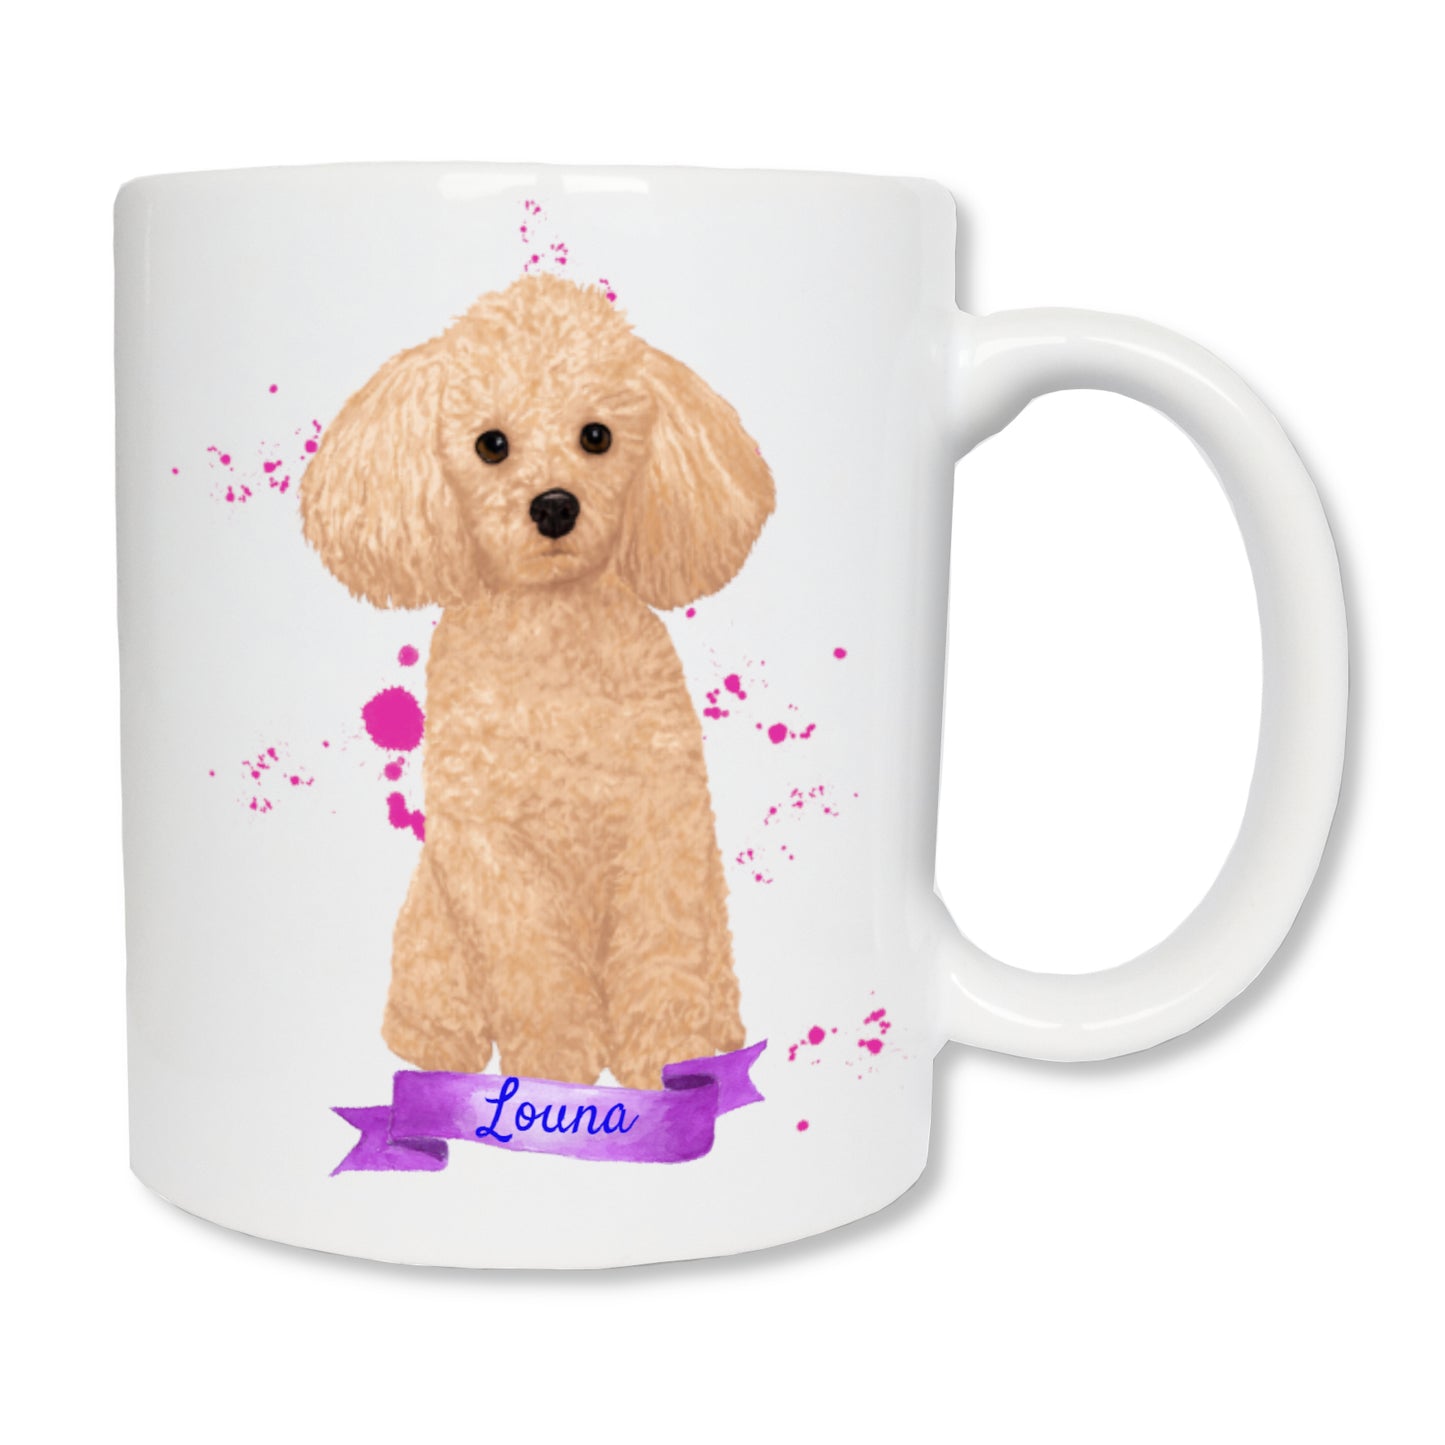 Personalized Poodle dog mug and his first name